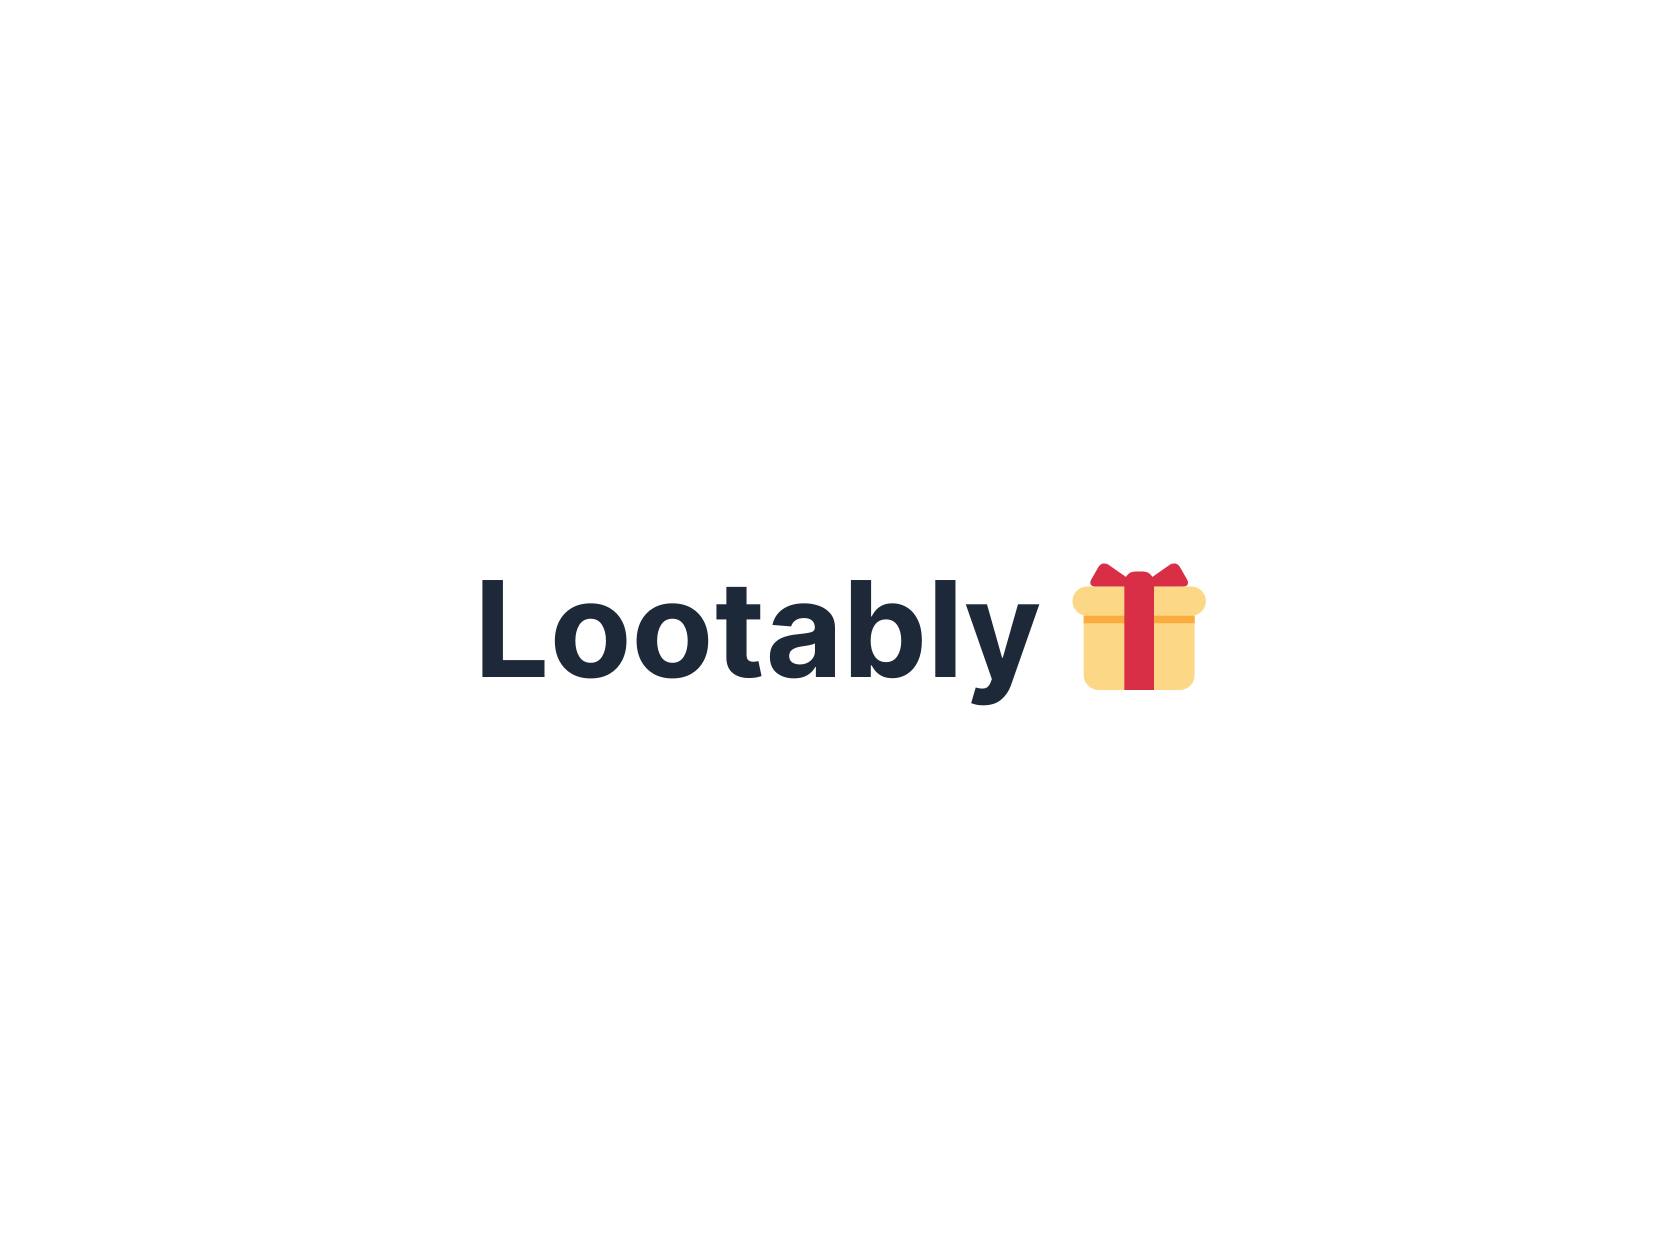 How to earn sats on SatFaucet using Lootably?